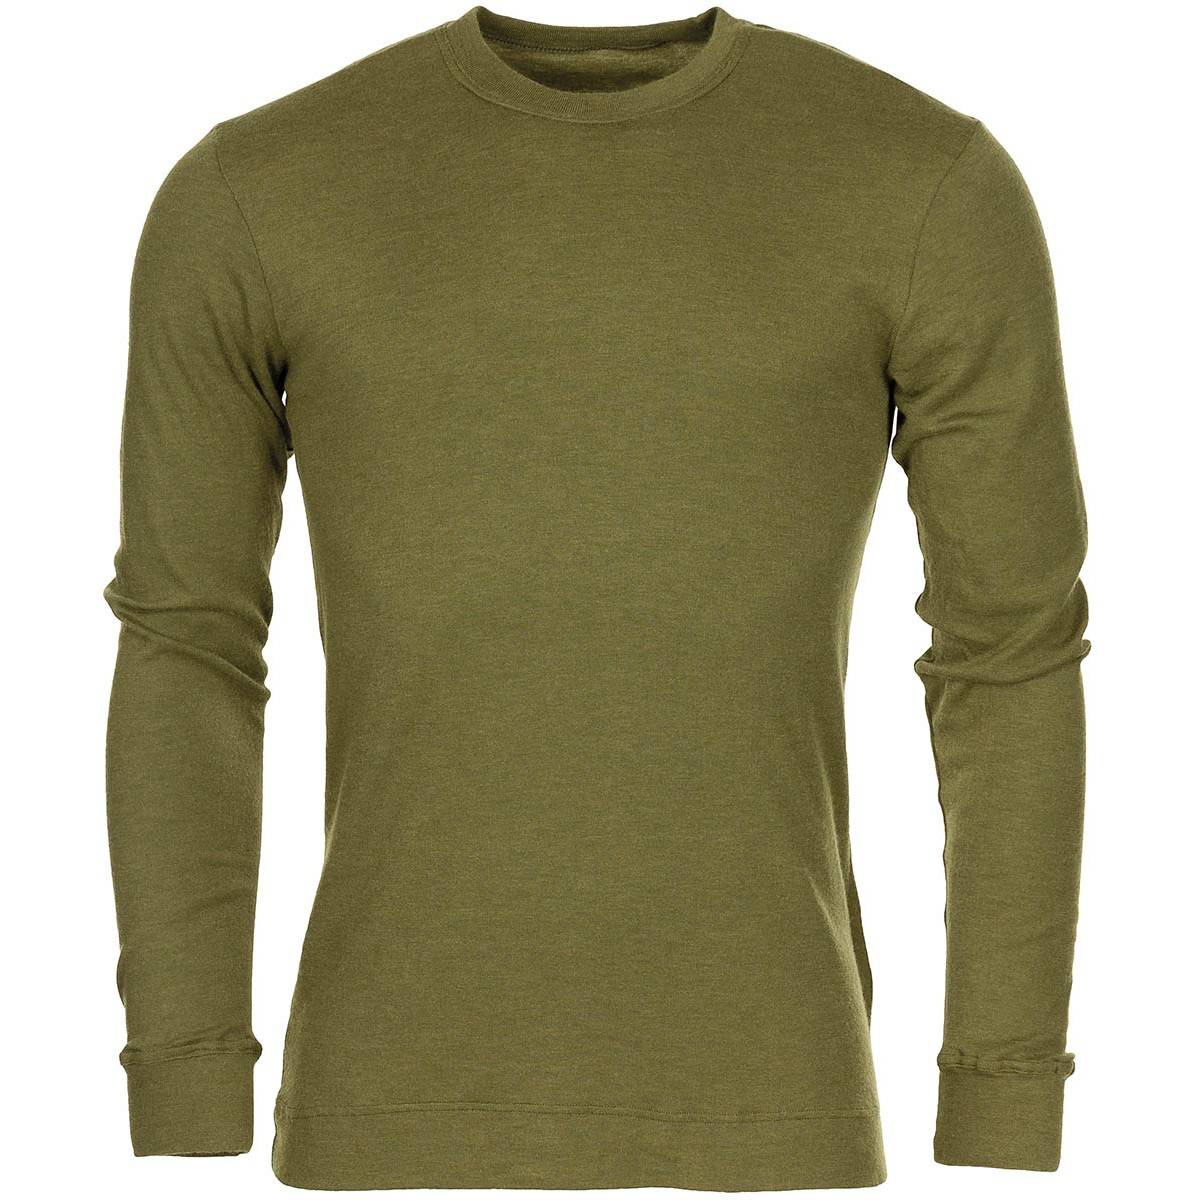 UNDERSHIRT FR AIRCREW- MILITARY SURPLUS FROM THE BRITISH ARMY - LIGHT ...